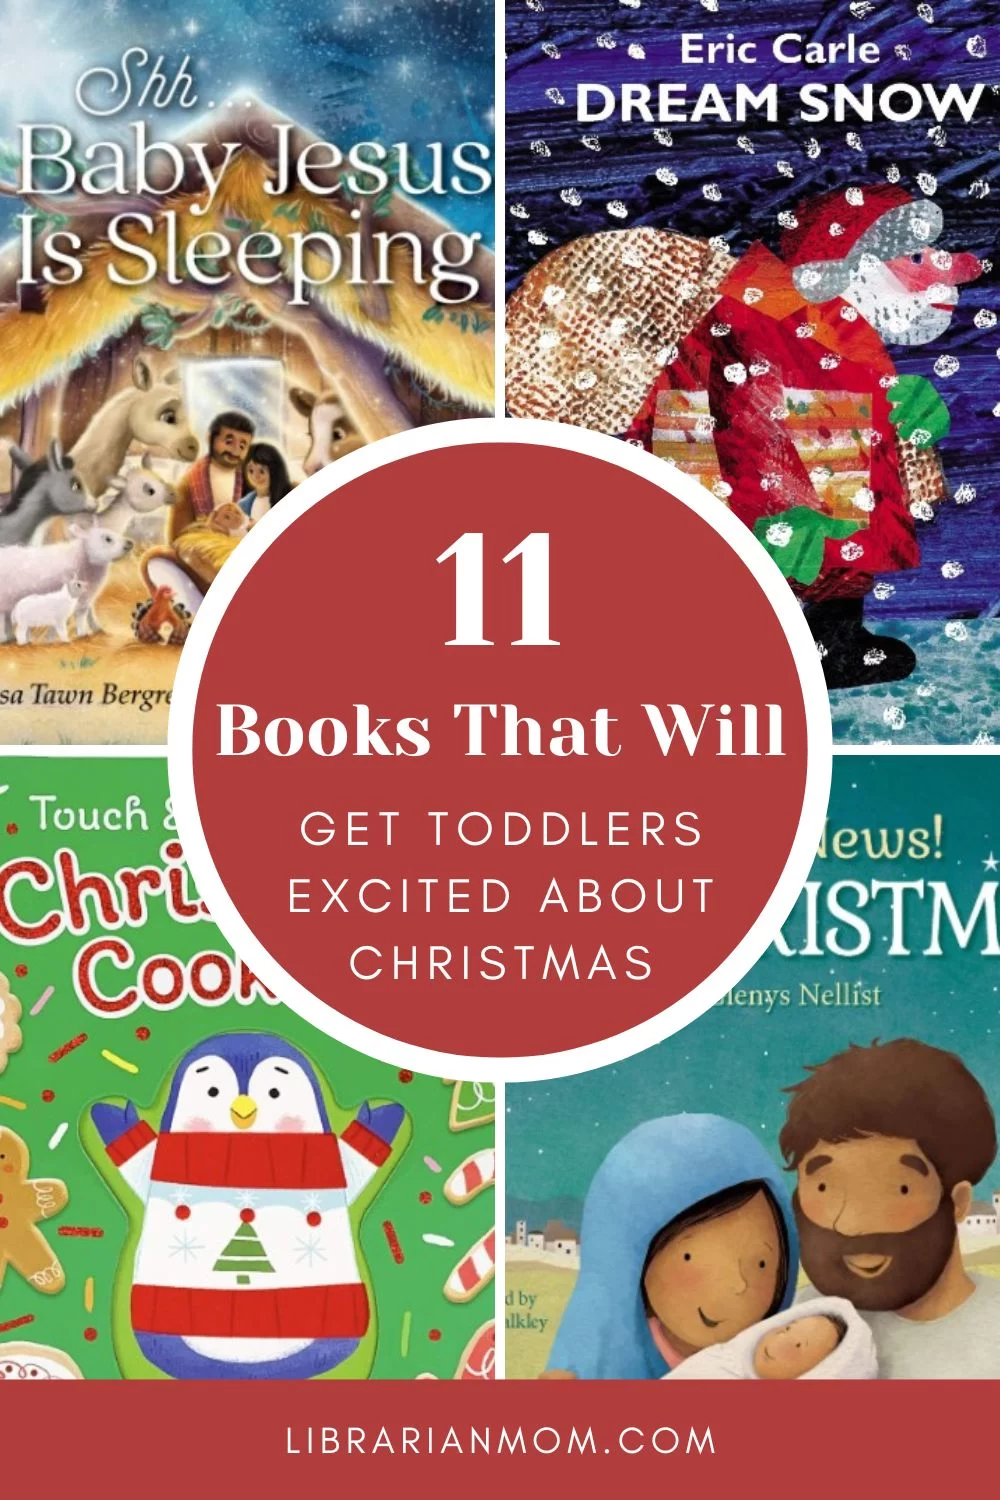 collage of images with text "11 books that will get toddlers excited about Christmas"